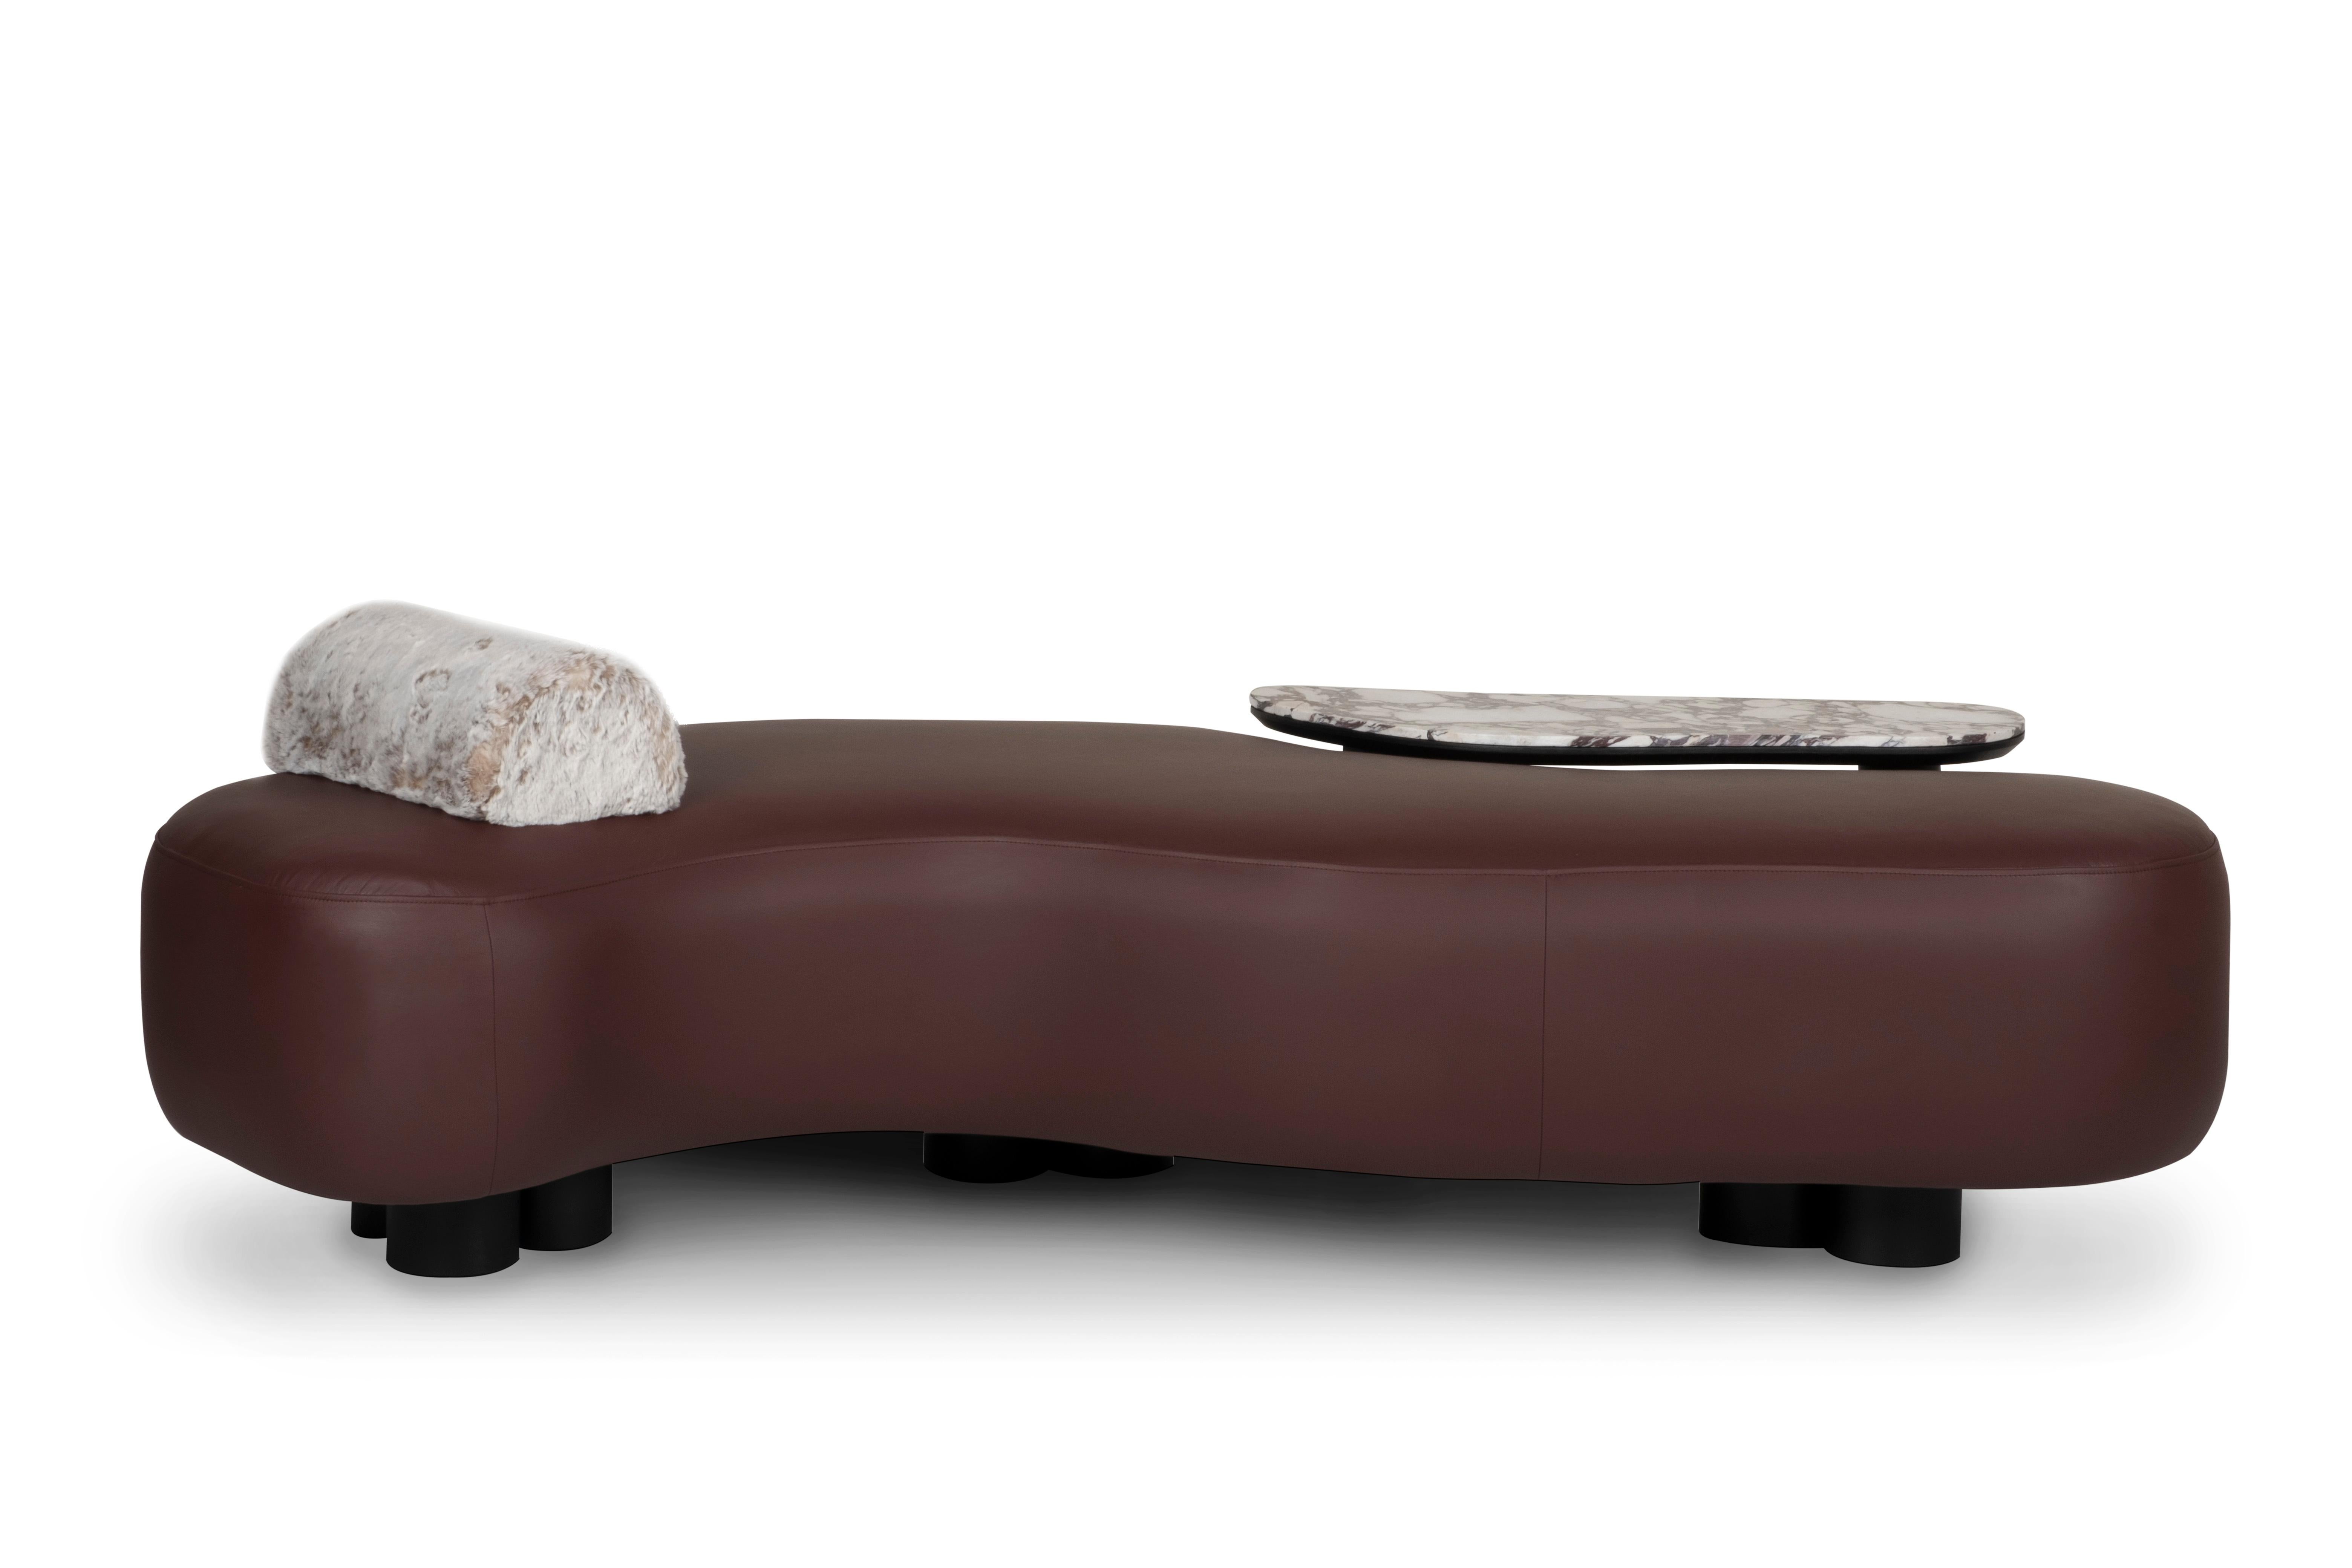 Minho Chaise Longue, Contemporary Collection, Handcrafted in Portugal - Europe by Greenapple.

Designed by Rute Martins for the Contemporary Collection, the Minho leather chaise lounge with a wooden side table is a modern interpretation of the